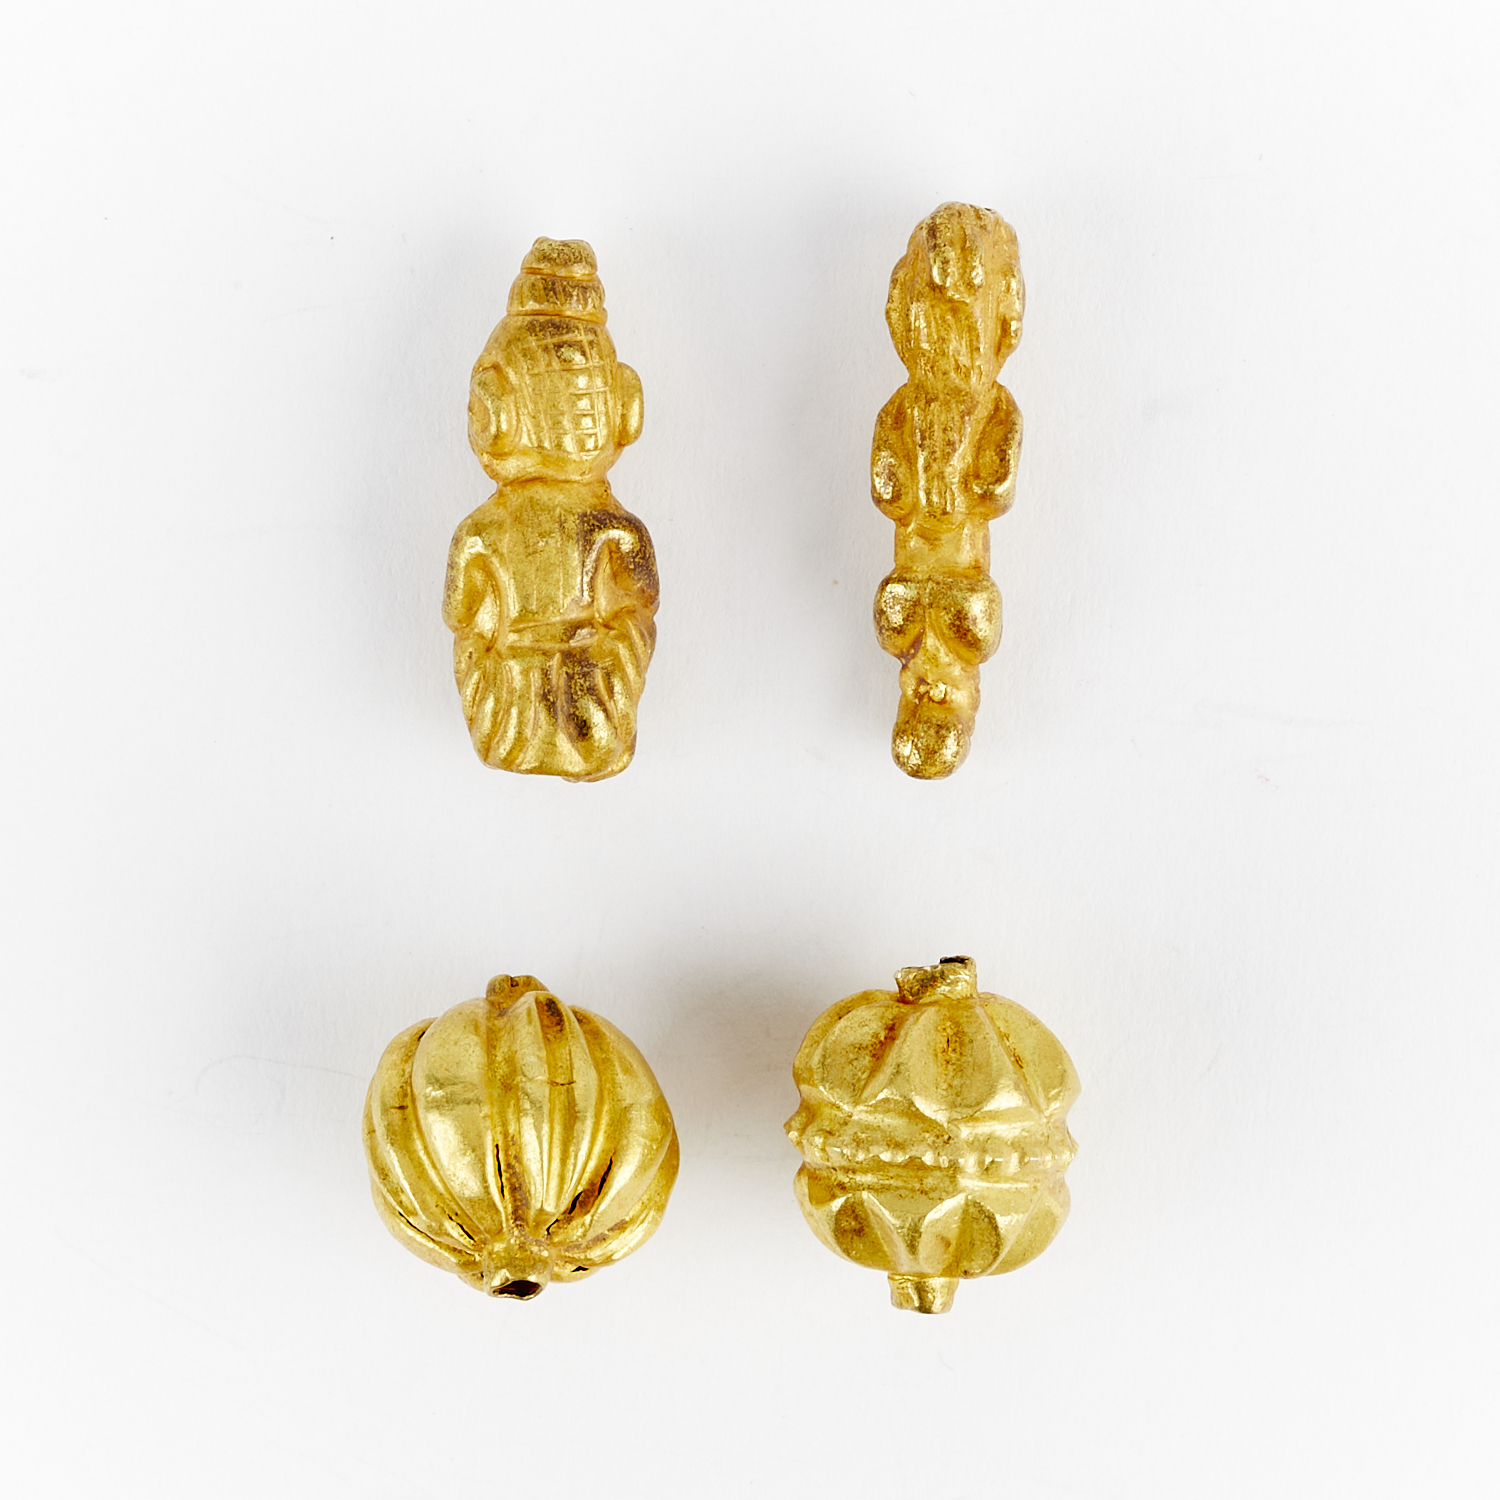 4 Southeast Asian Silk Road Gold Beads - Image 4 of 4